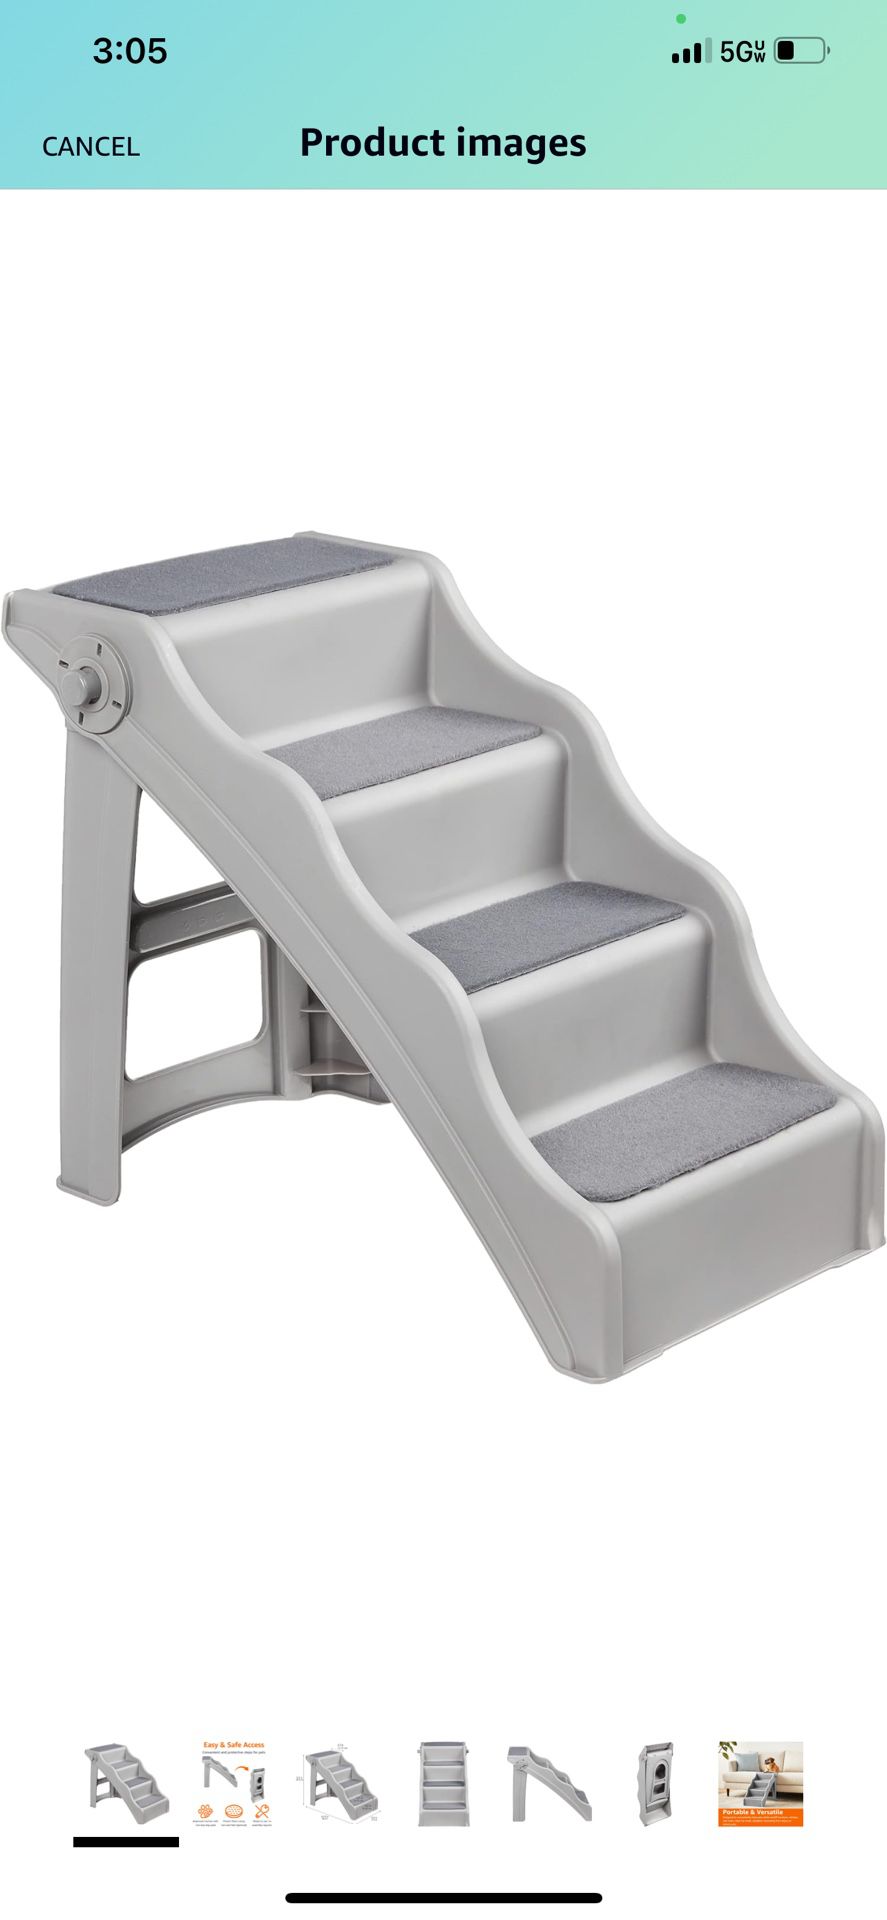 Amazon Basics Foldable Steps for Dogs and Cats, Grey, 14.6"X24.82"X19.5"